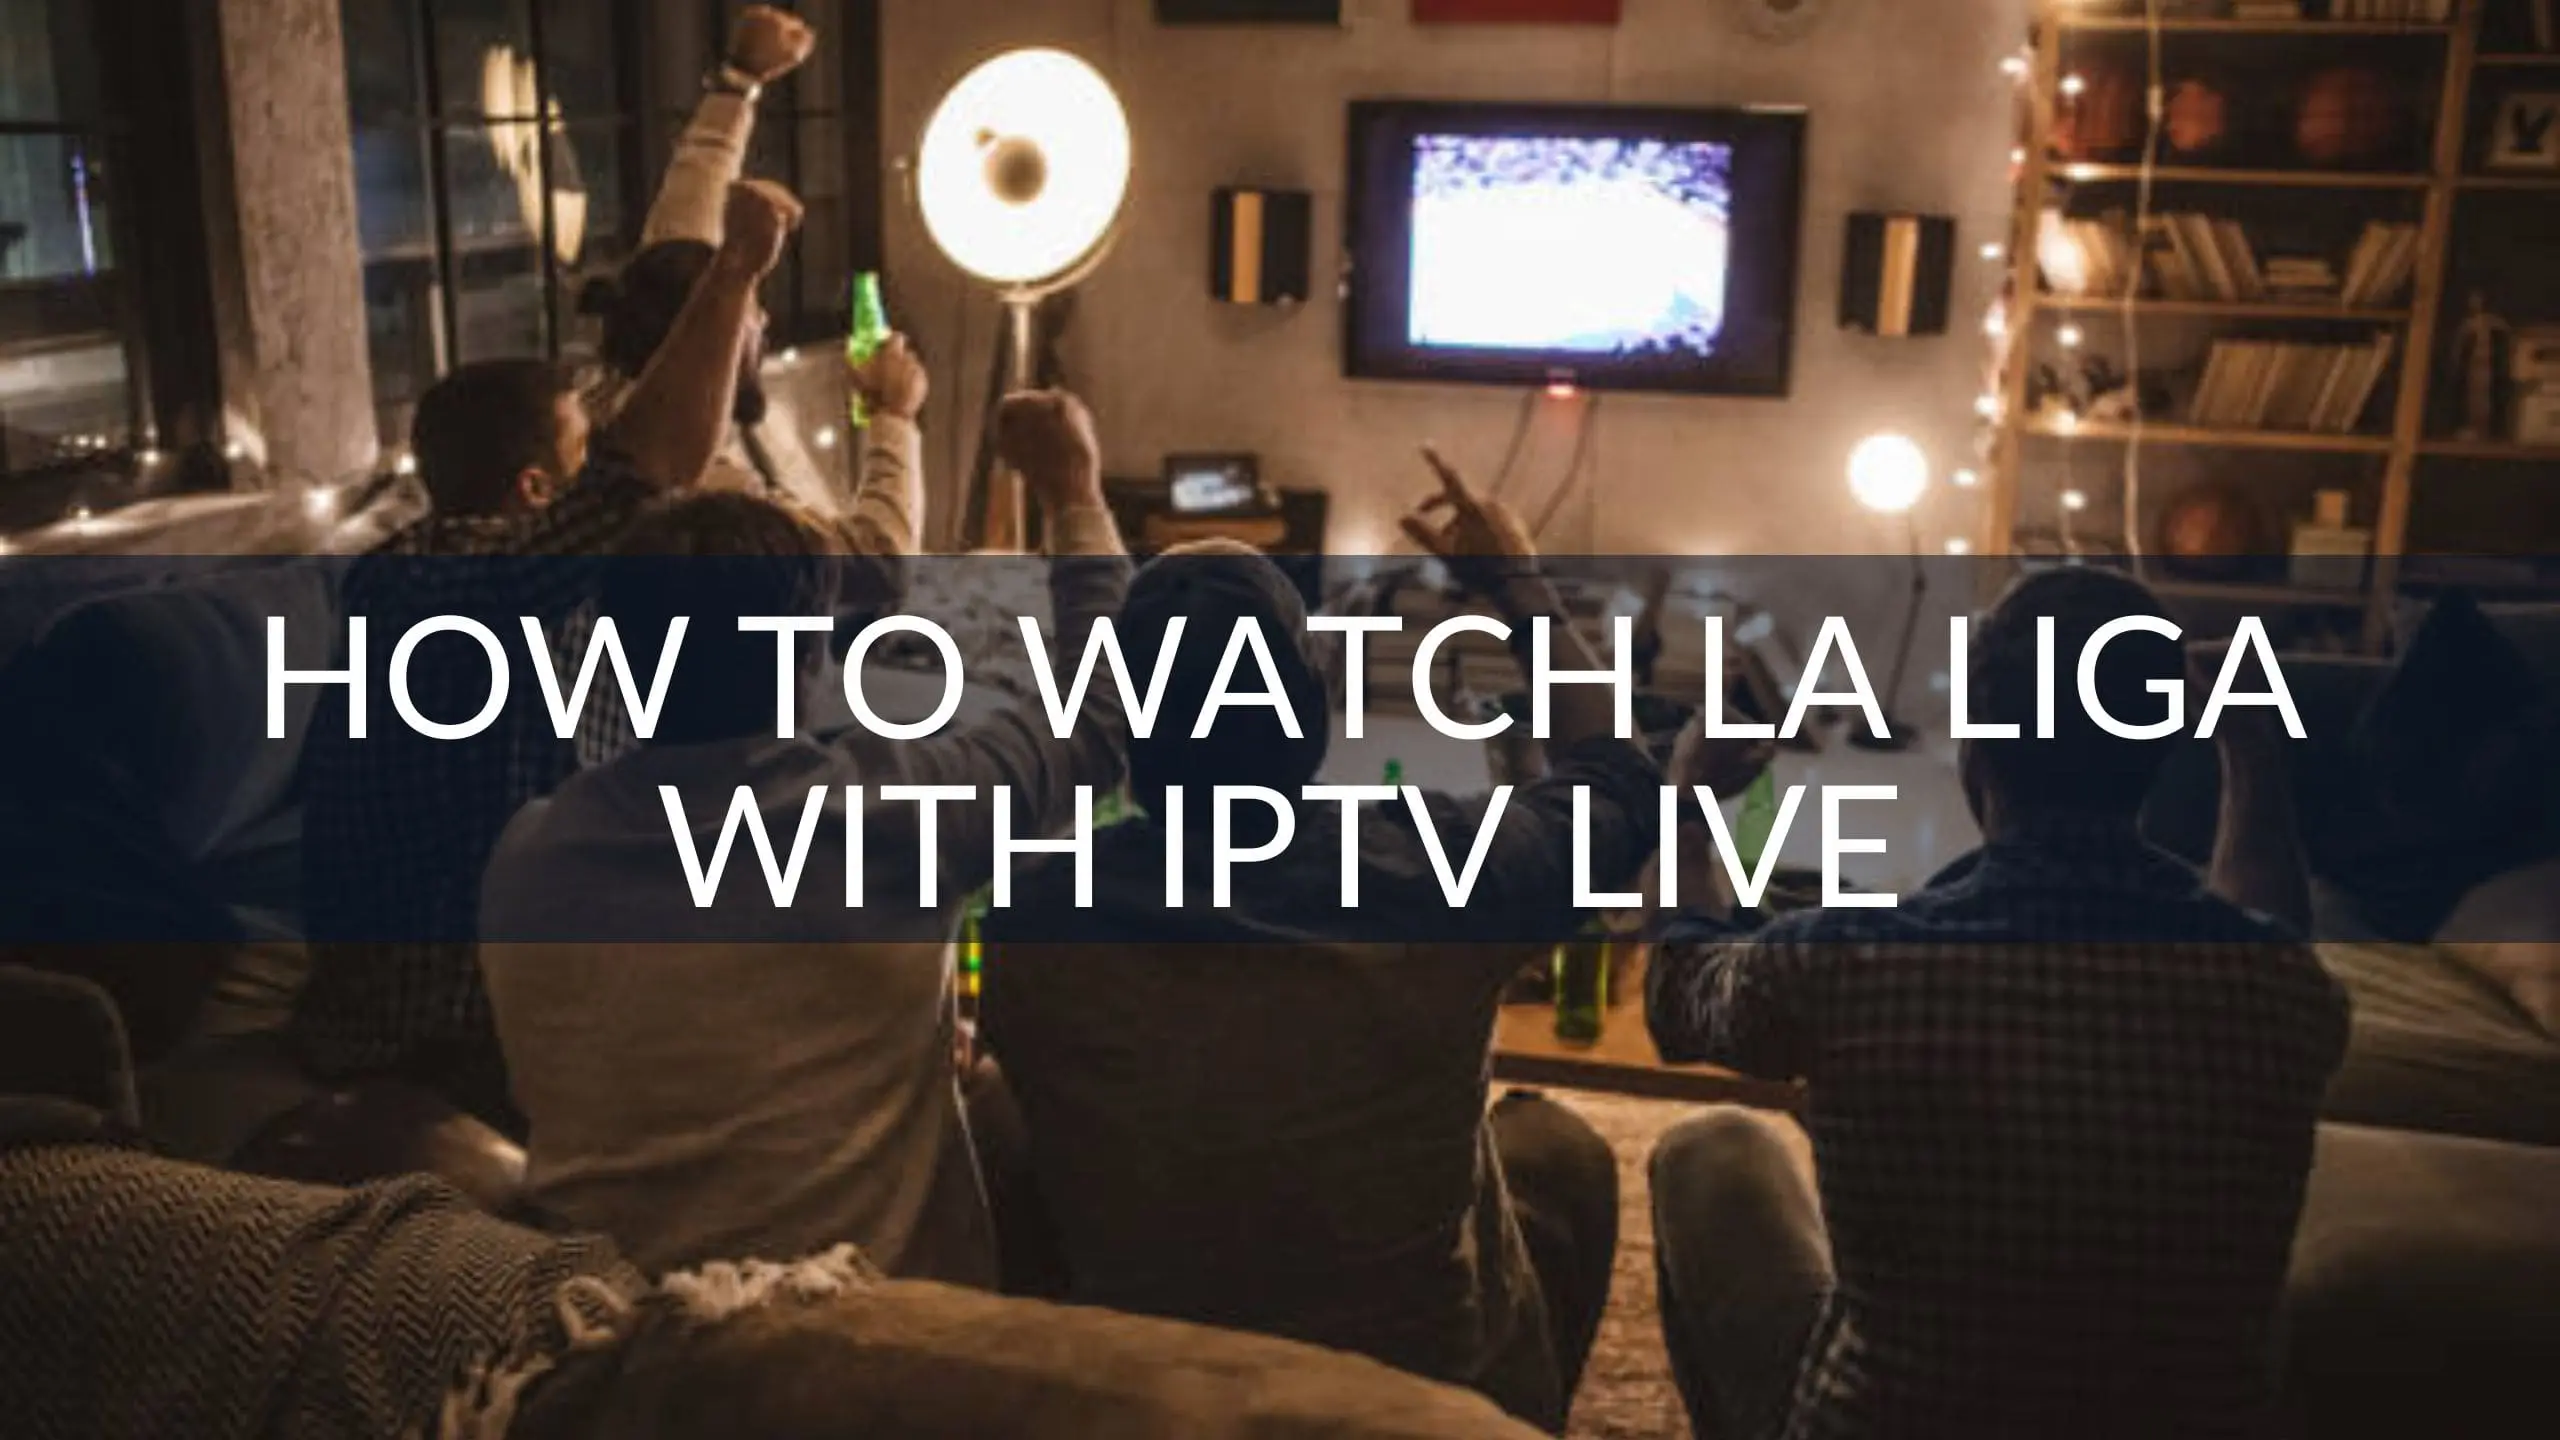 How to Watch La Liga with IPTV Live at a Good Price